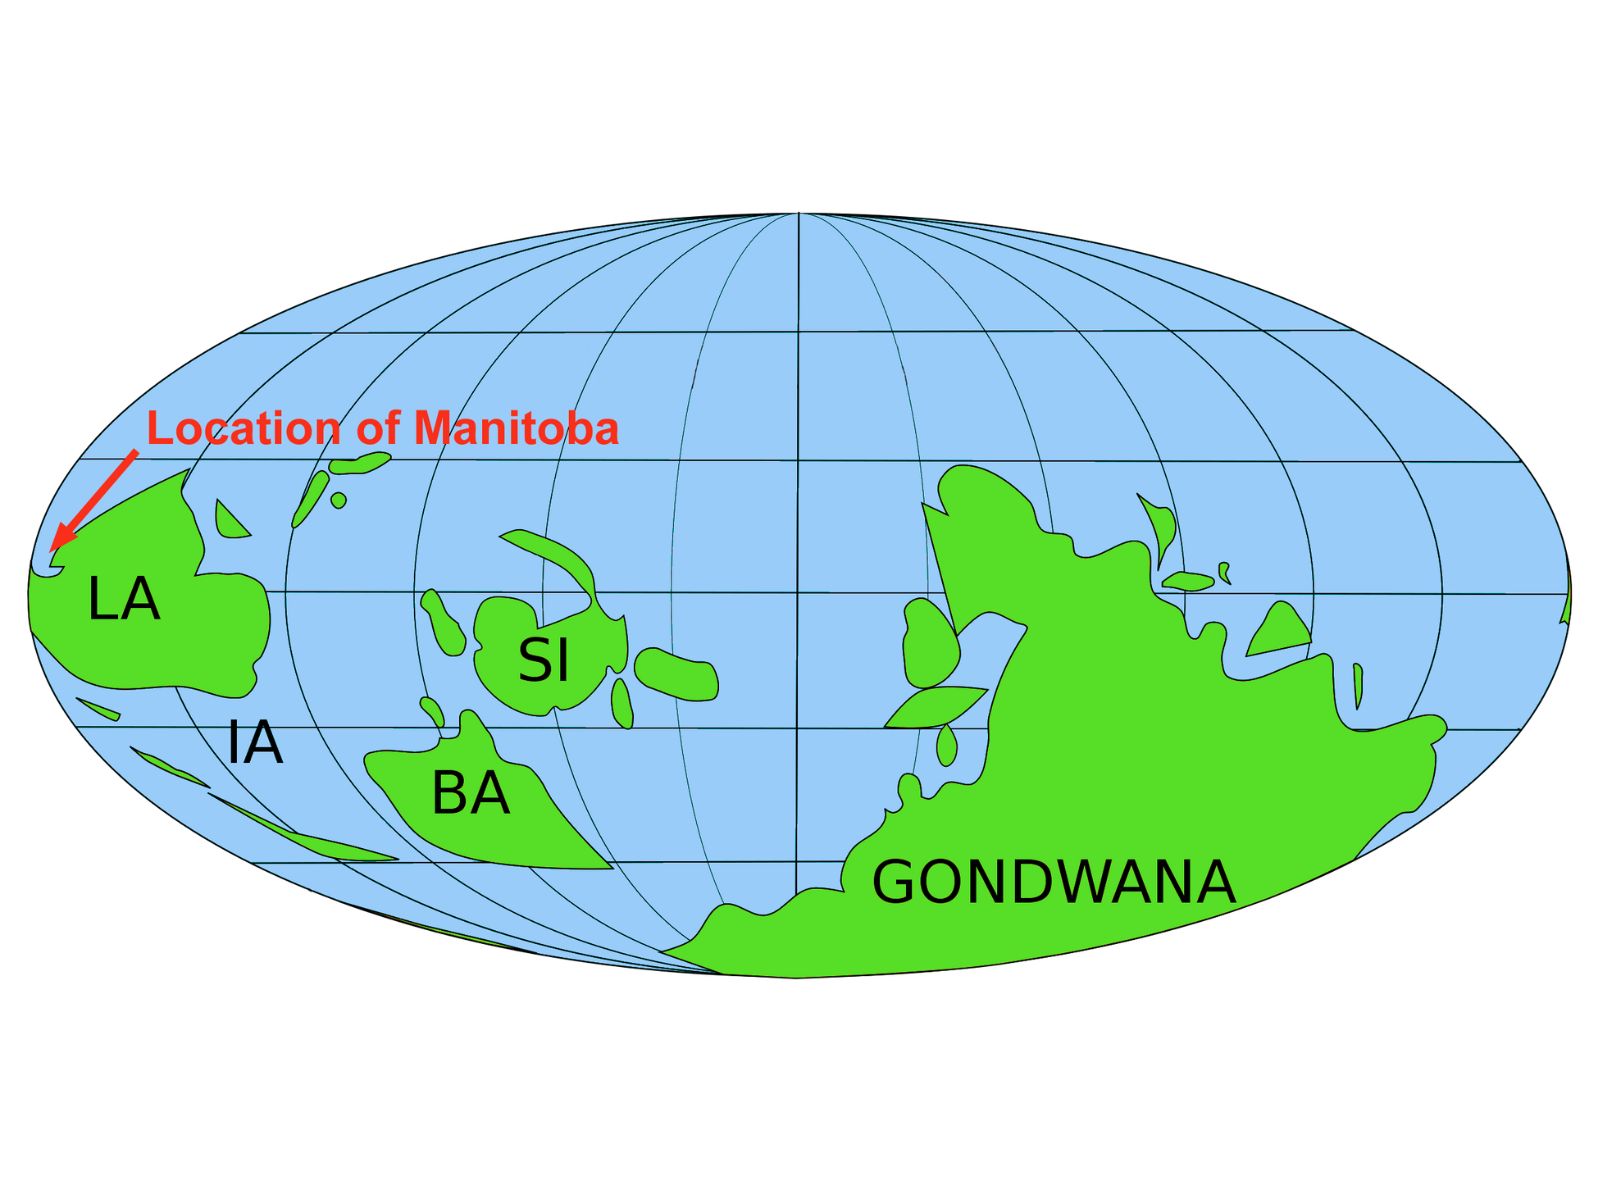 Map graphic of the globe with ancient continents as seen during the Ordovician Period. A red arrow points to the location of Manitoba on the continent labelled “LA” for Laurentia.